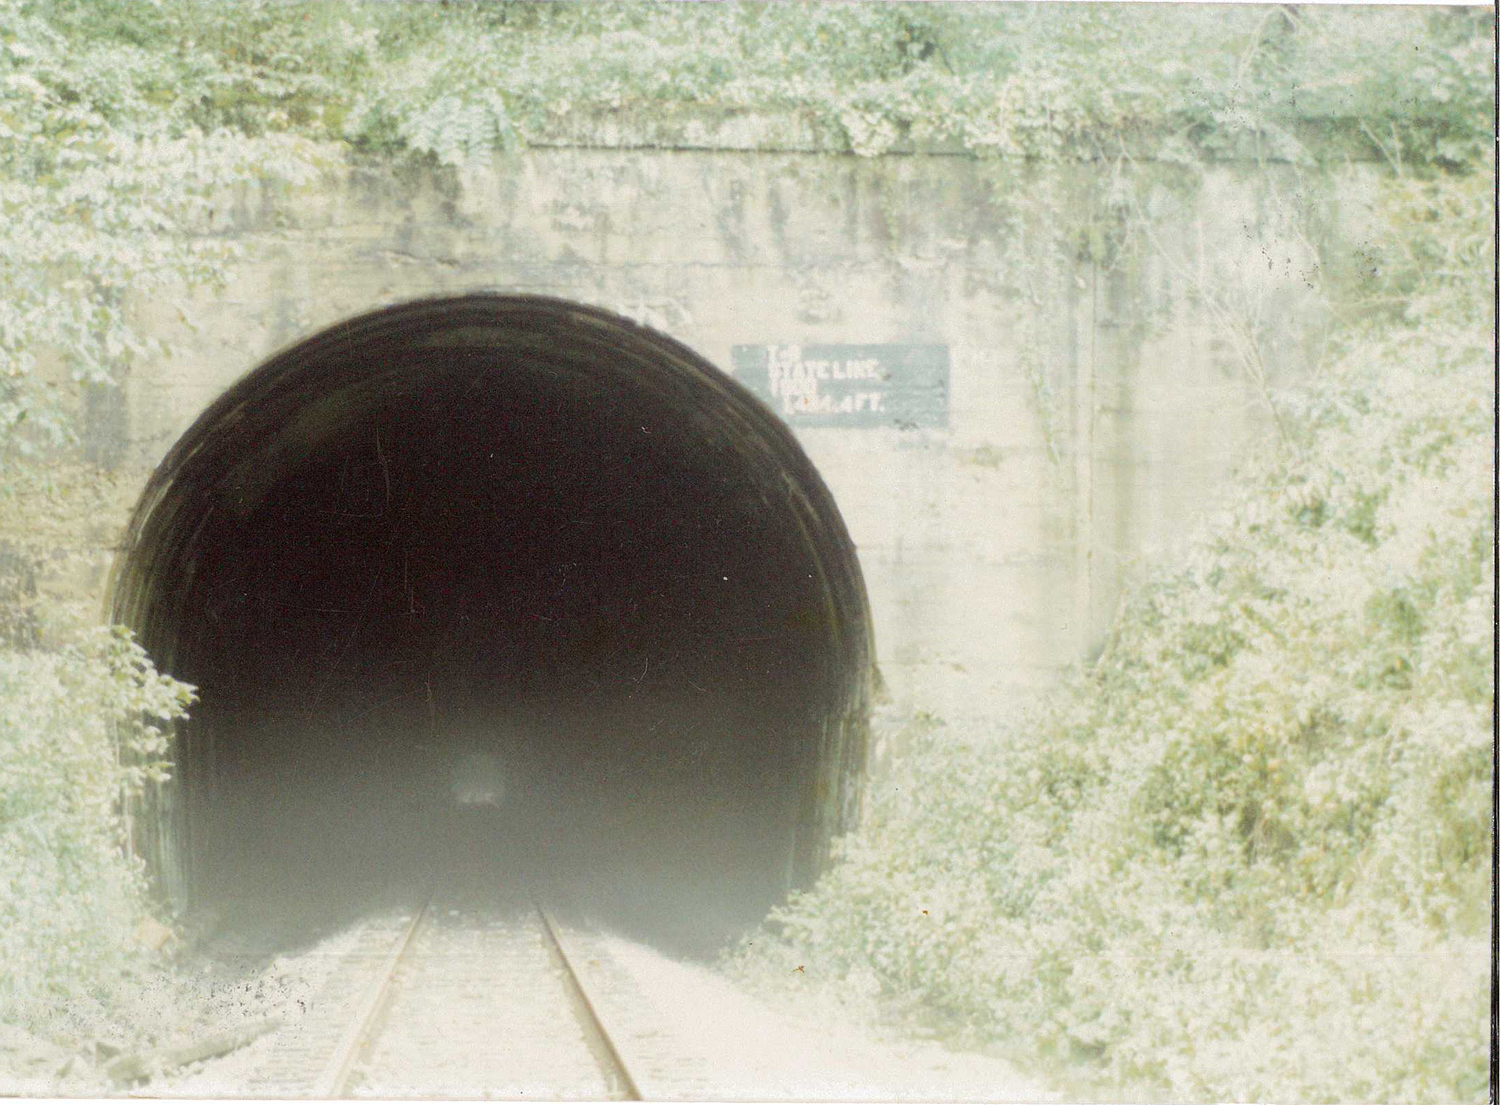 Entrance to the Stateline Tunnel, known at the time as Wabash Tunnel, that straddles the Pennsylvania/West Virginia border. Albert Miller Papers and Photographs, MSS 1095, Meadowcroft Rockshelter and Historic Village.